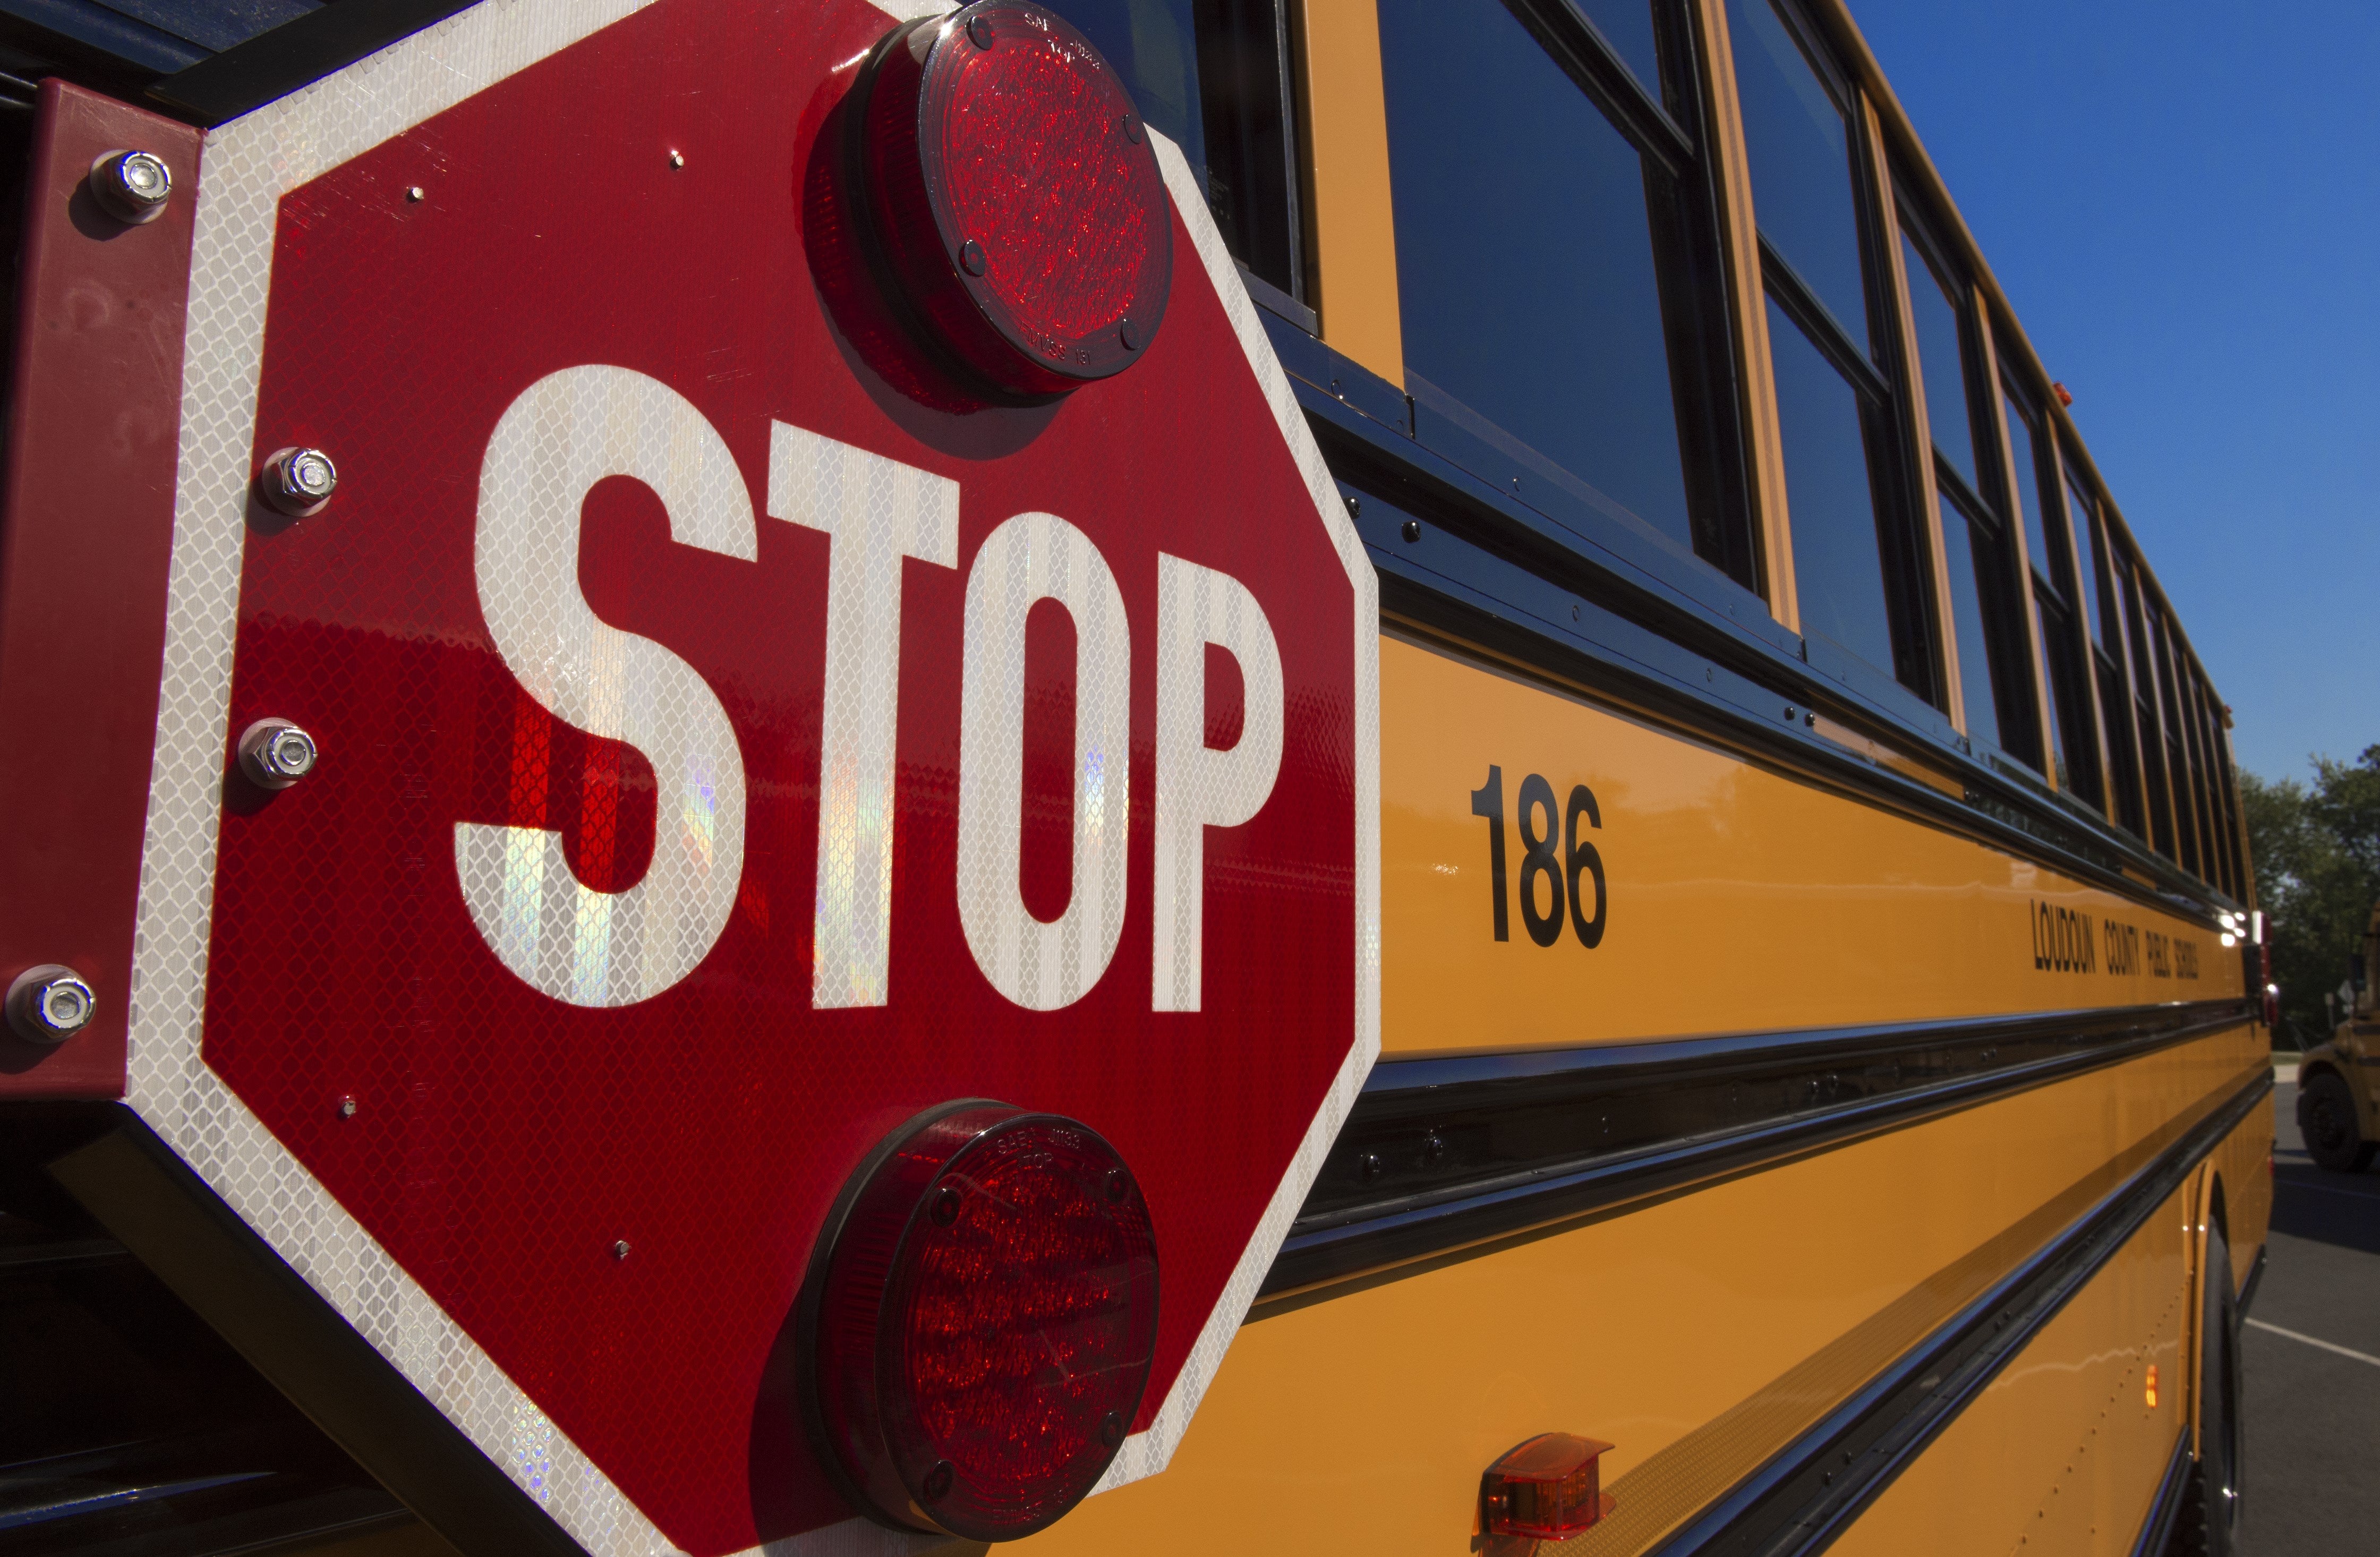 Utah Mother Sues Driver For Dragging Biracial Son 150 Feet With Bus